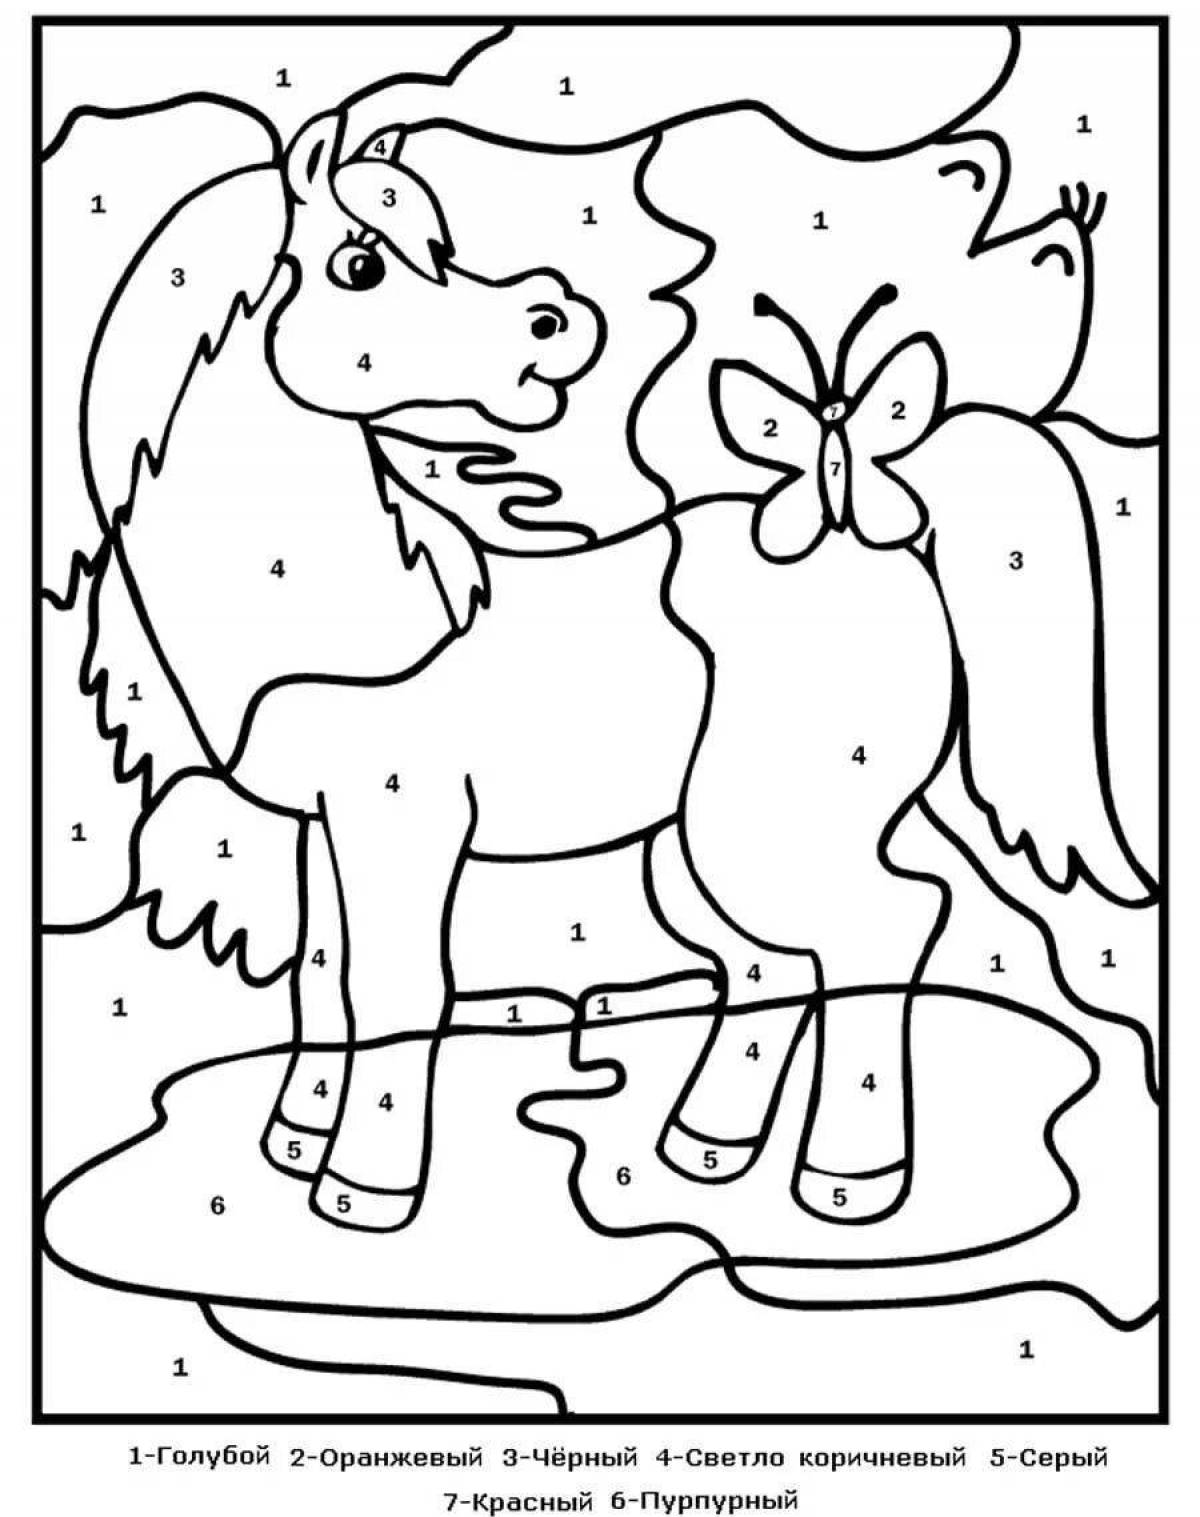 Incredible animal coloring pages by numbers